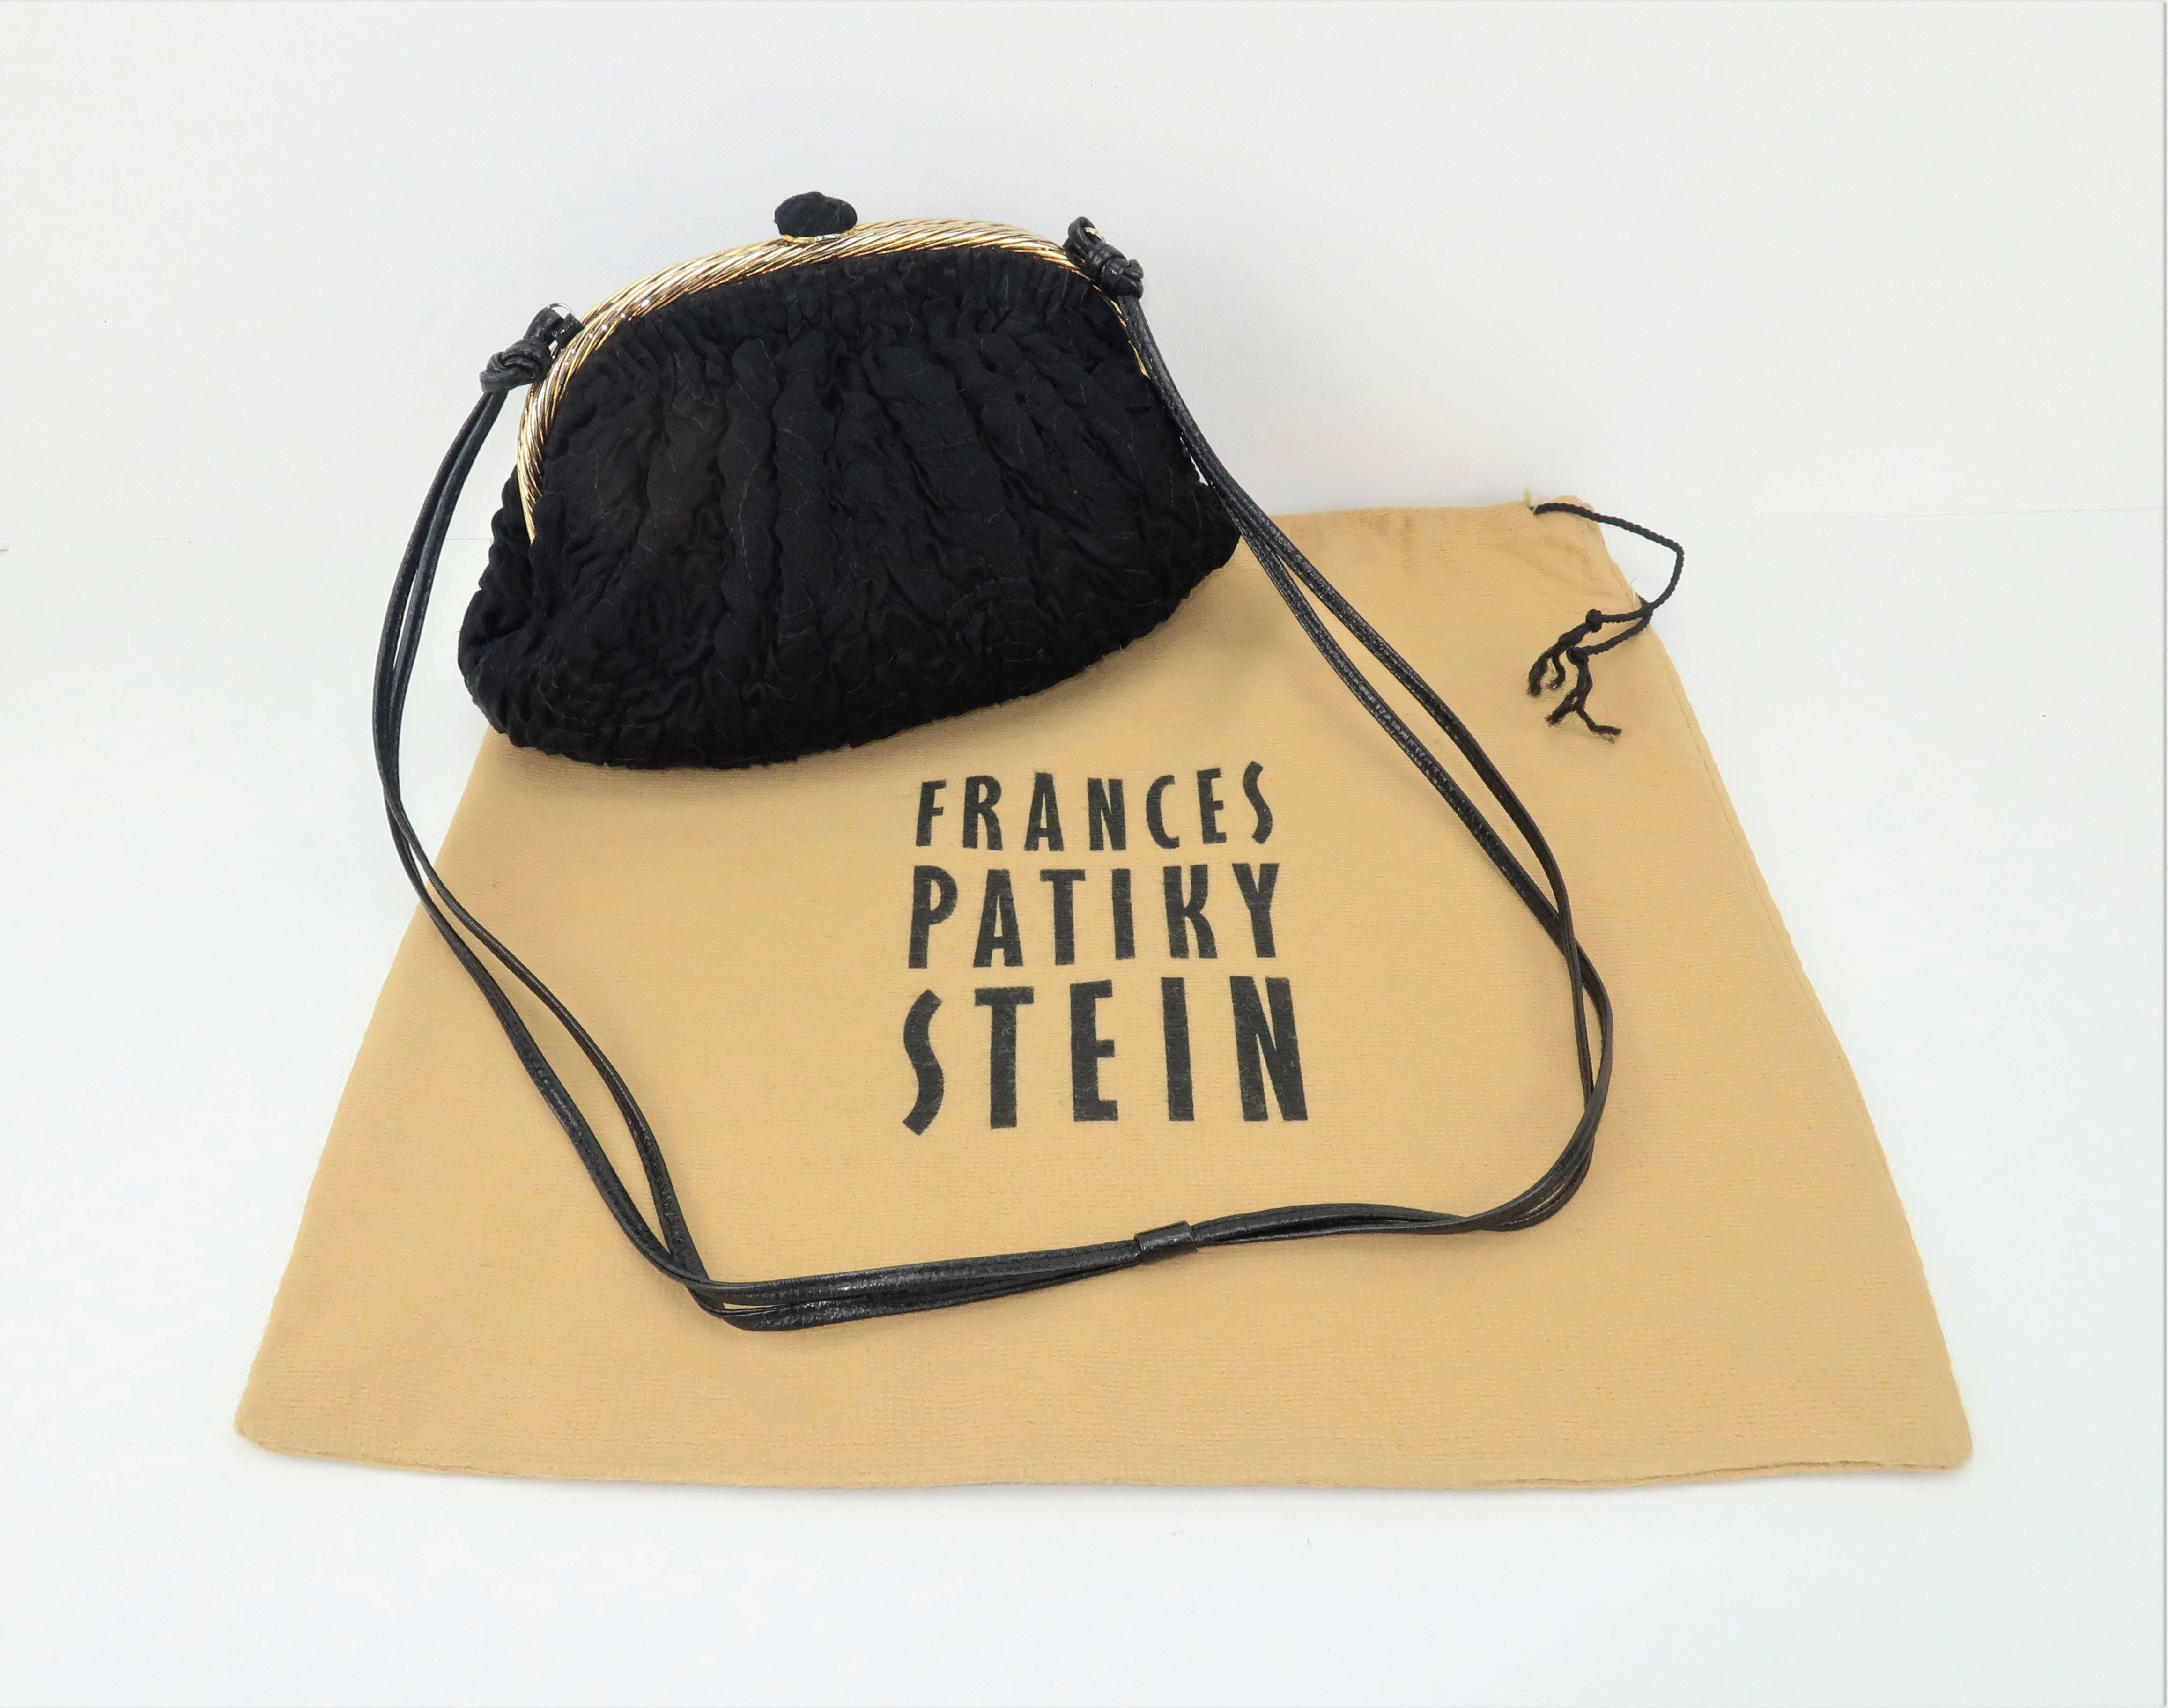 This classic black evening handbag is brought to you from the talented hands of former fashion editor, Frances Patiky Stein.  Ms. Stein has worked for everyone from Vogue to Glamour.  She also served as artistic director for Chanel accessories in